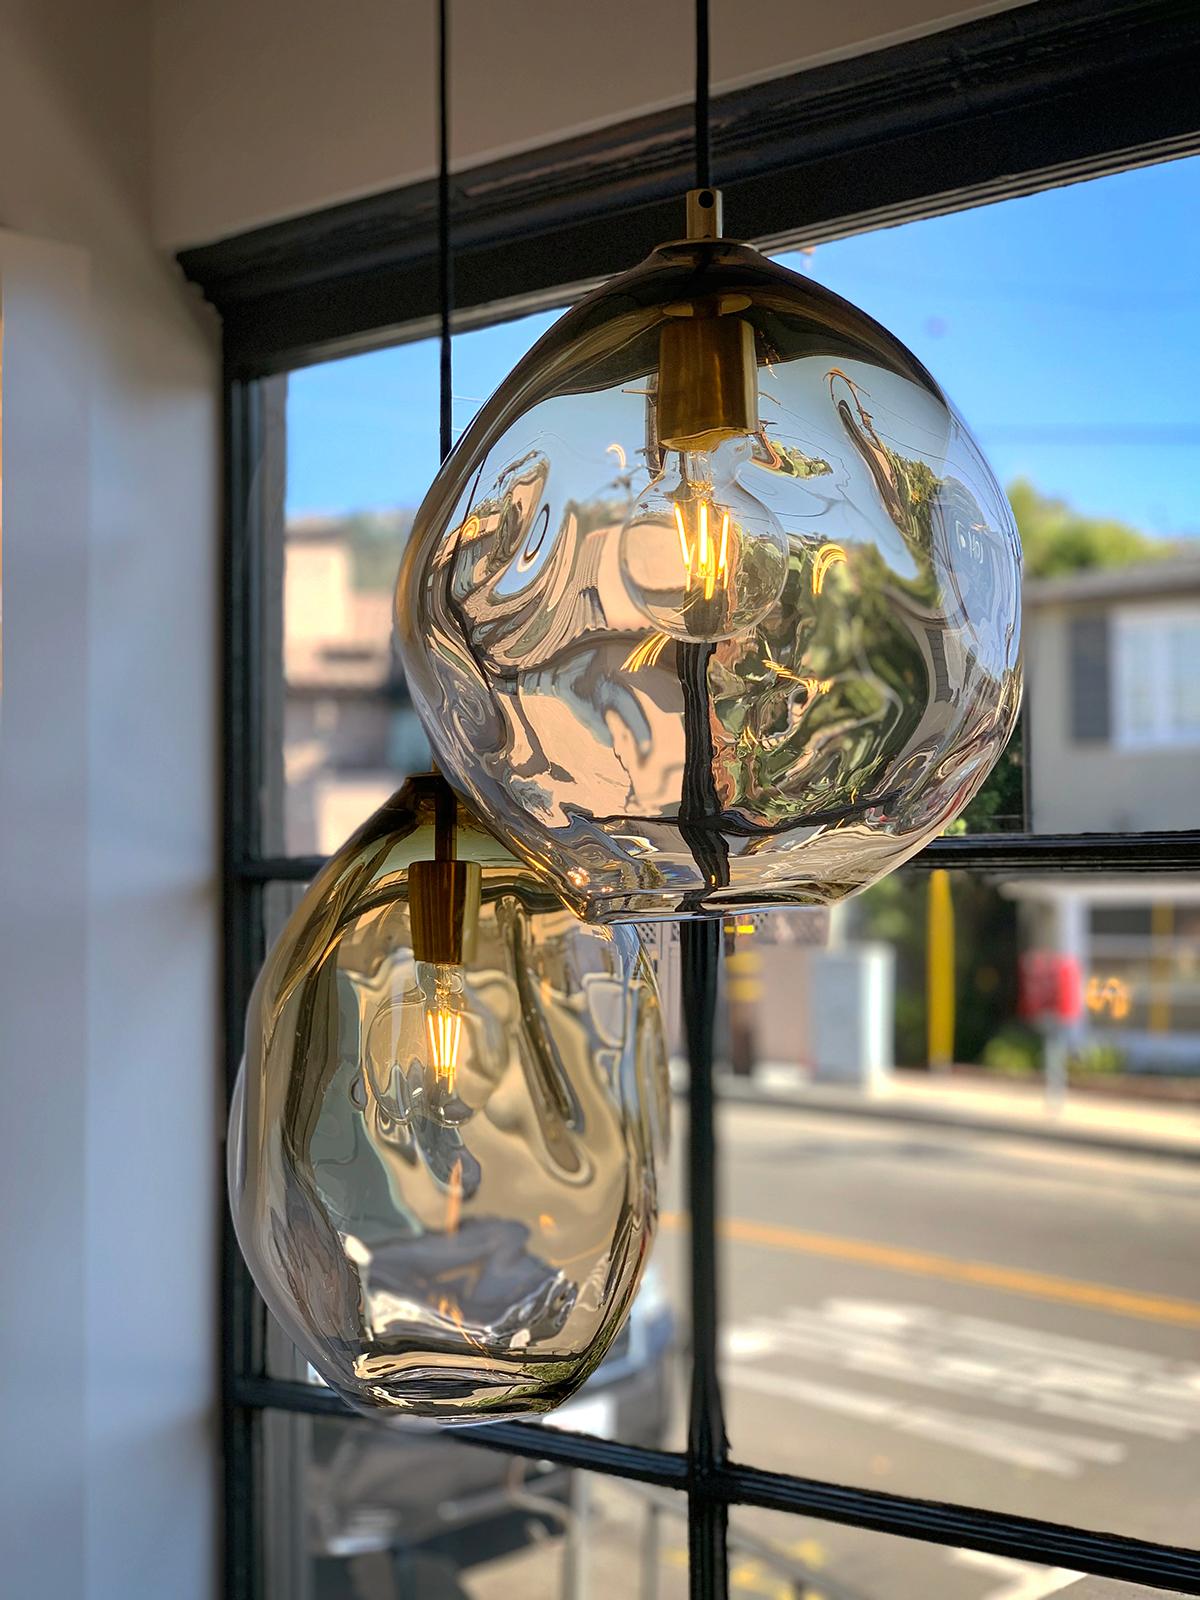 The Wabi Pendant is a departure from the more symmetrical shapes of our other lines, celebrating the natural movement and fluid matter of the glass. It gets its namesake from the Japanese world view of wabi-sabi, which embraces imperfection.